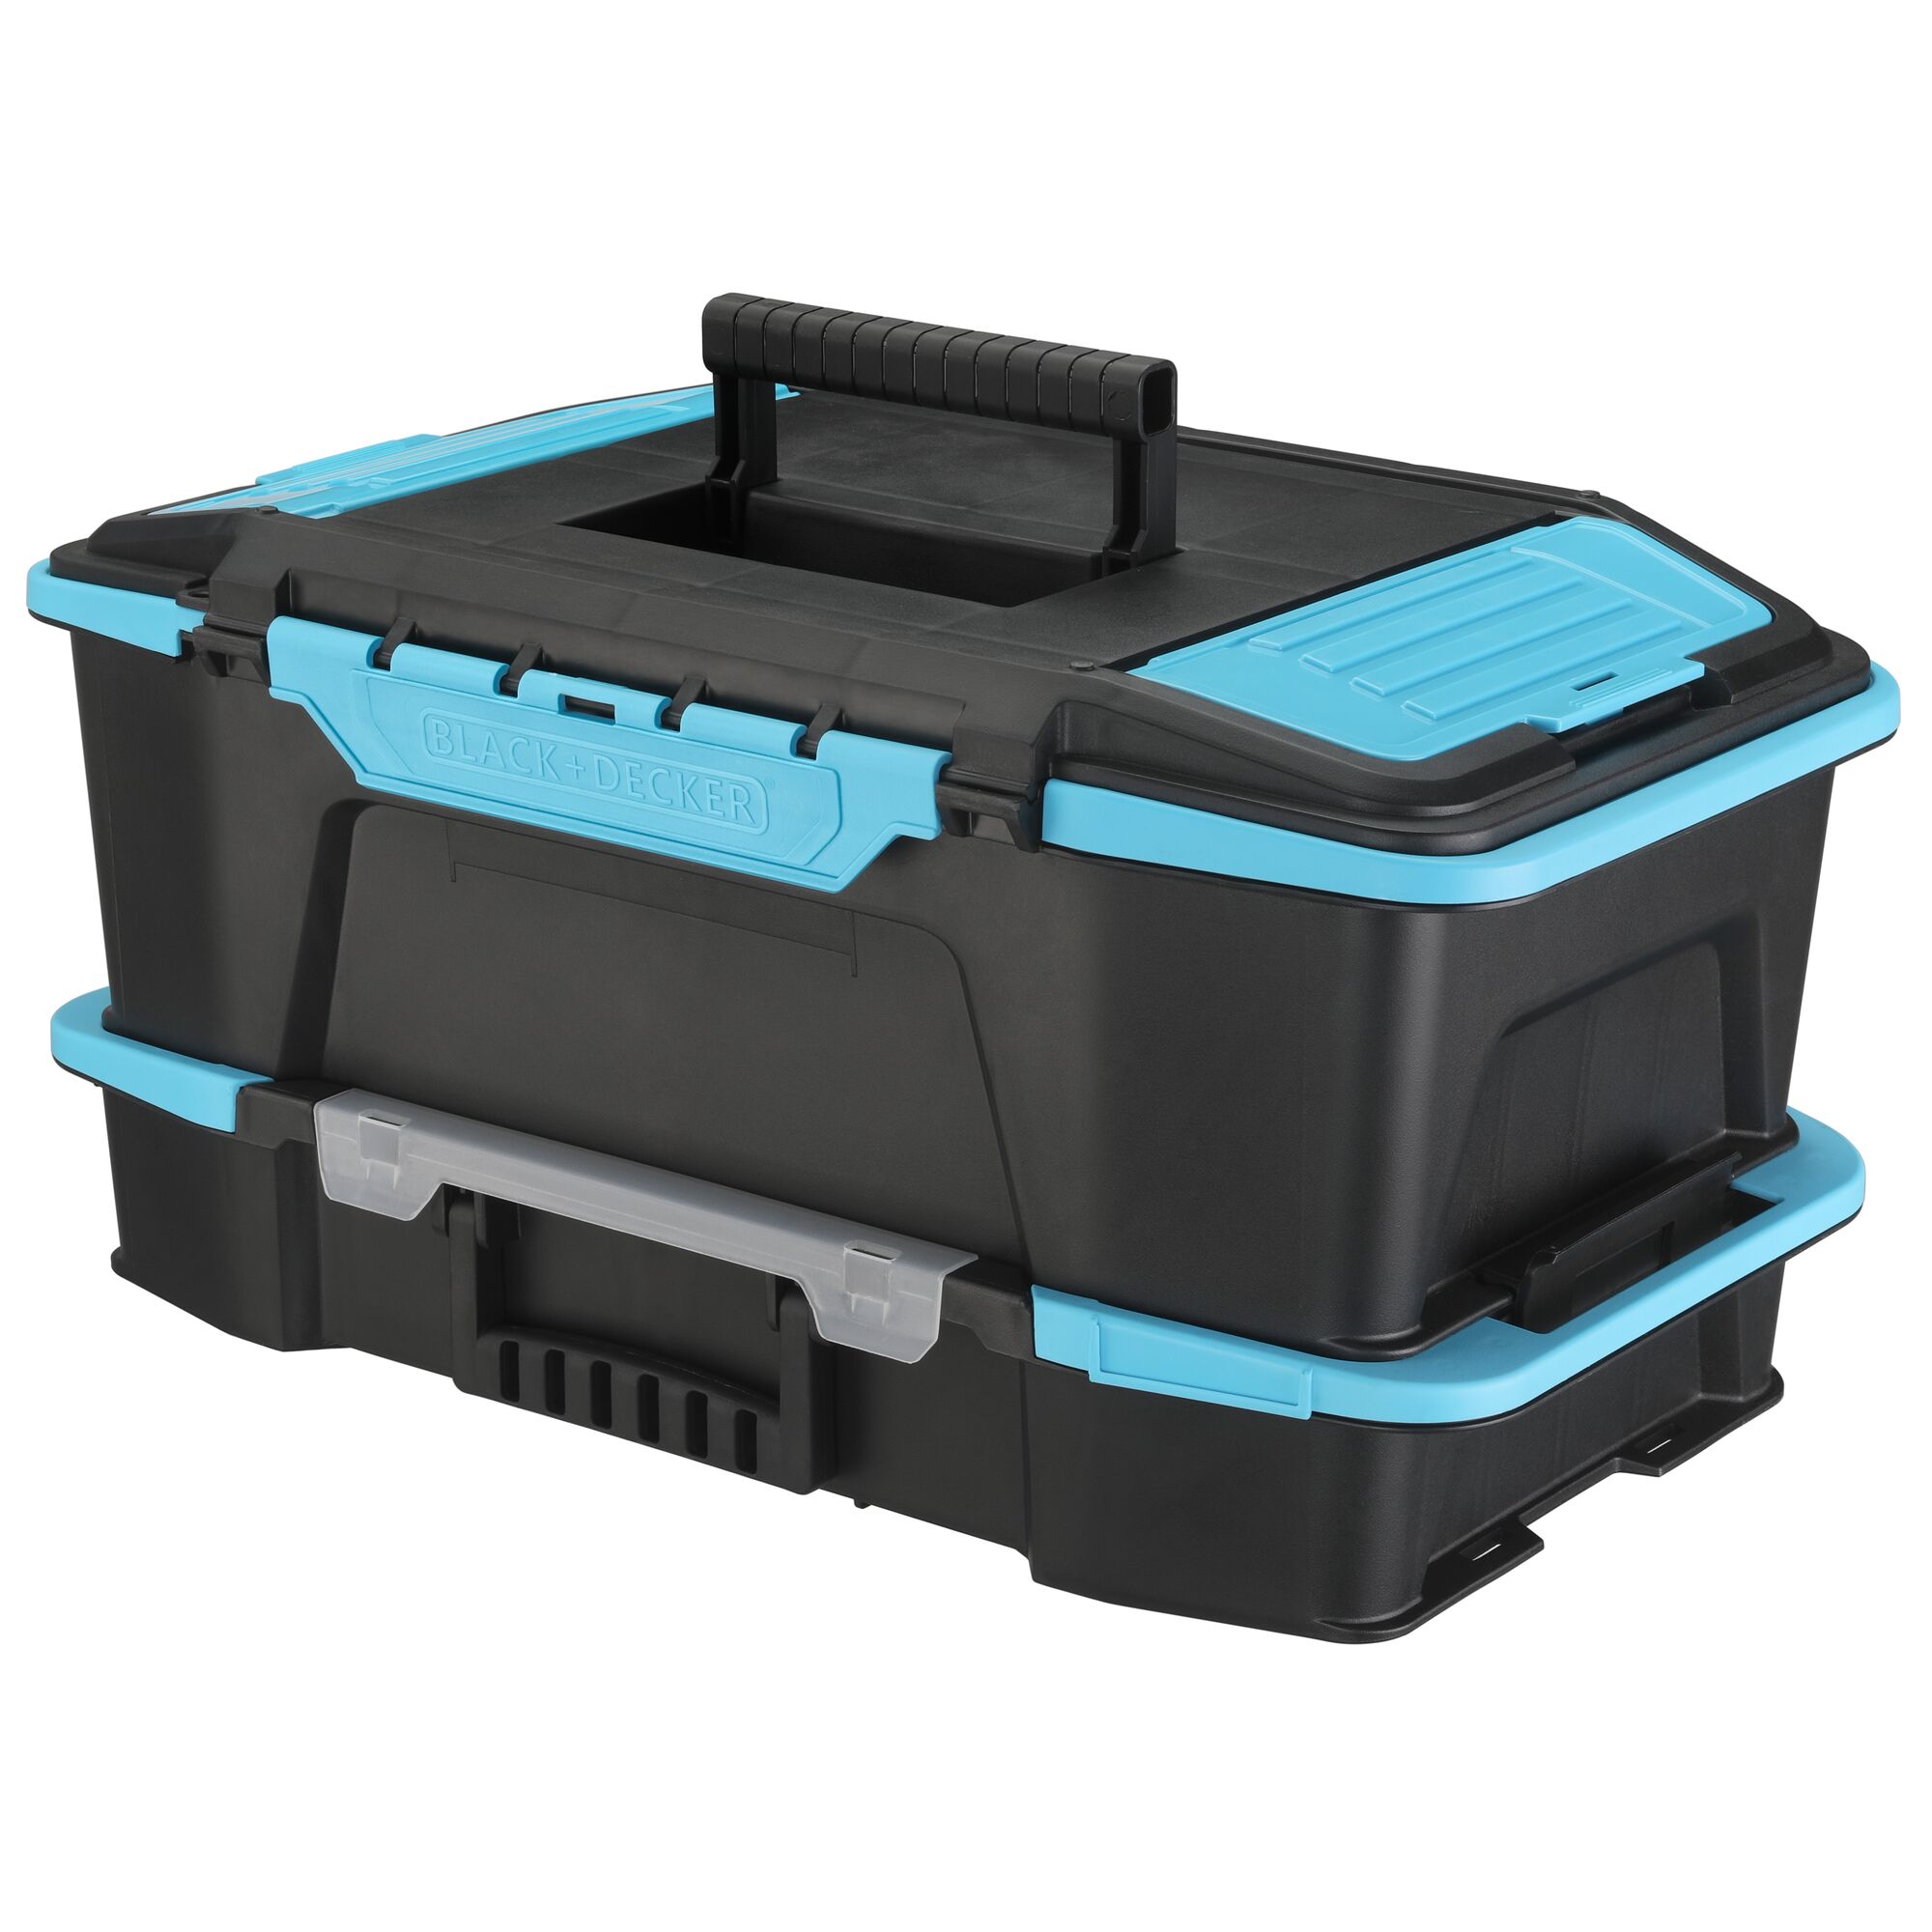 Black and decker 19” Stackable Caddy And Organizer